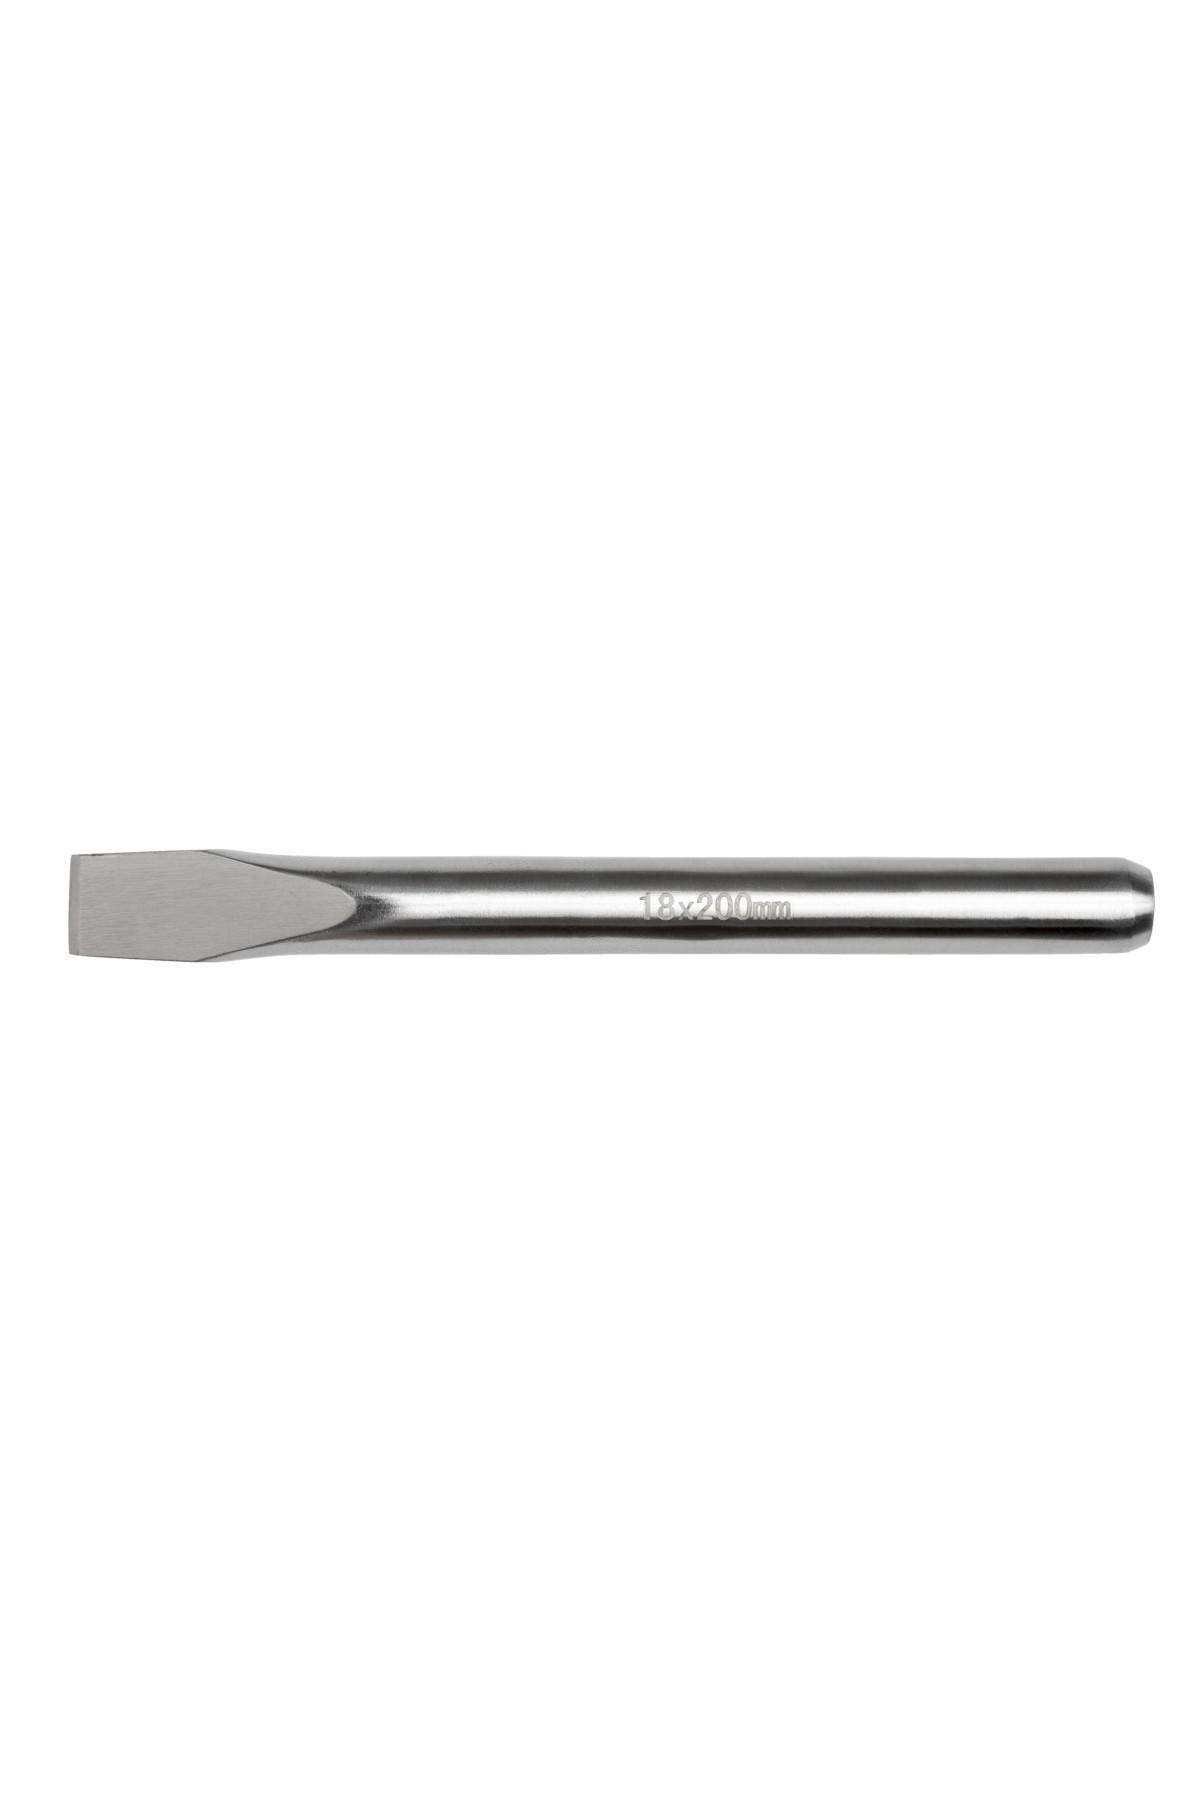 Flat chisel stainless 18-200mm